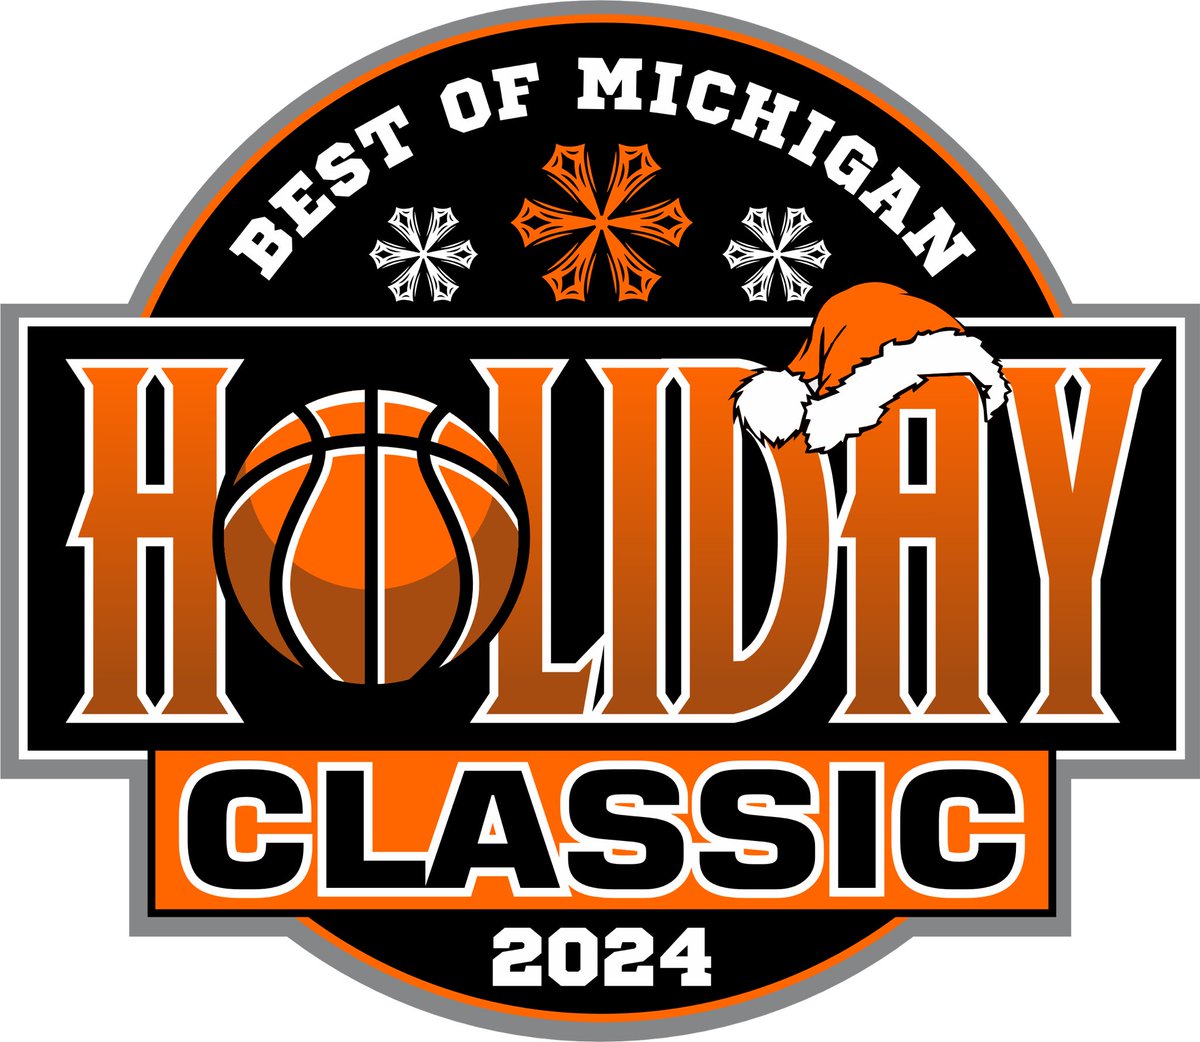 Detroit Renaissance @LadyPhoenixBB is in for the Best of Michigan Holiday Classic in December @LBIPremierBB @LBI_Carolina @wadesworld32